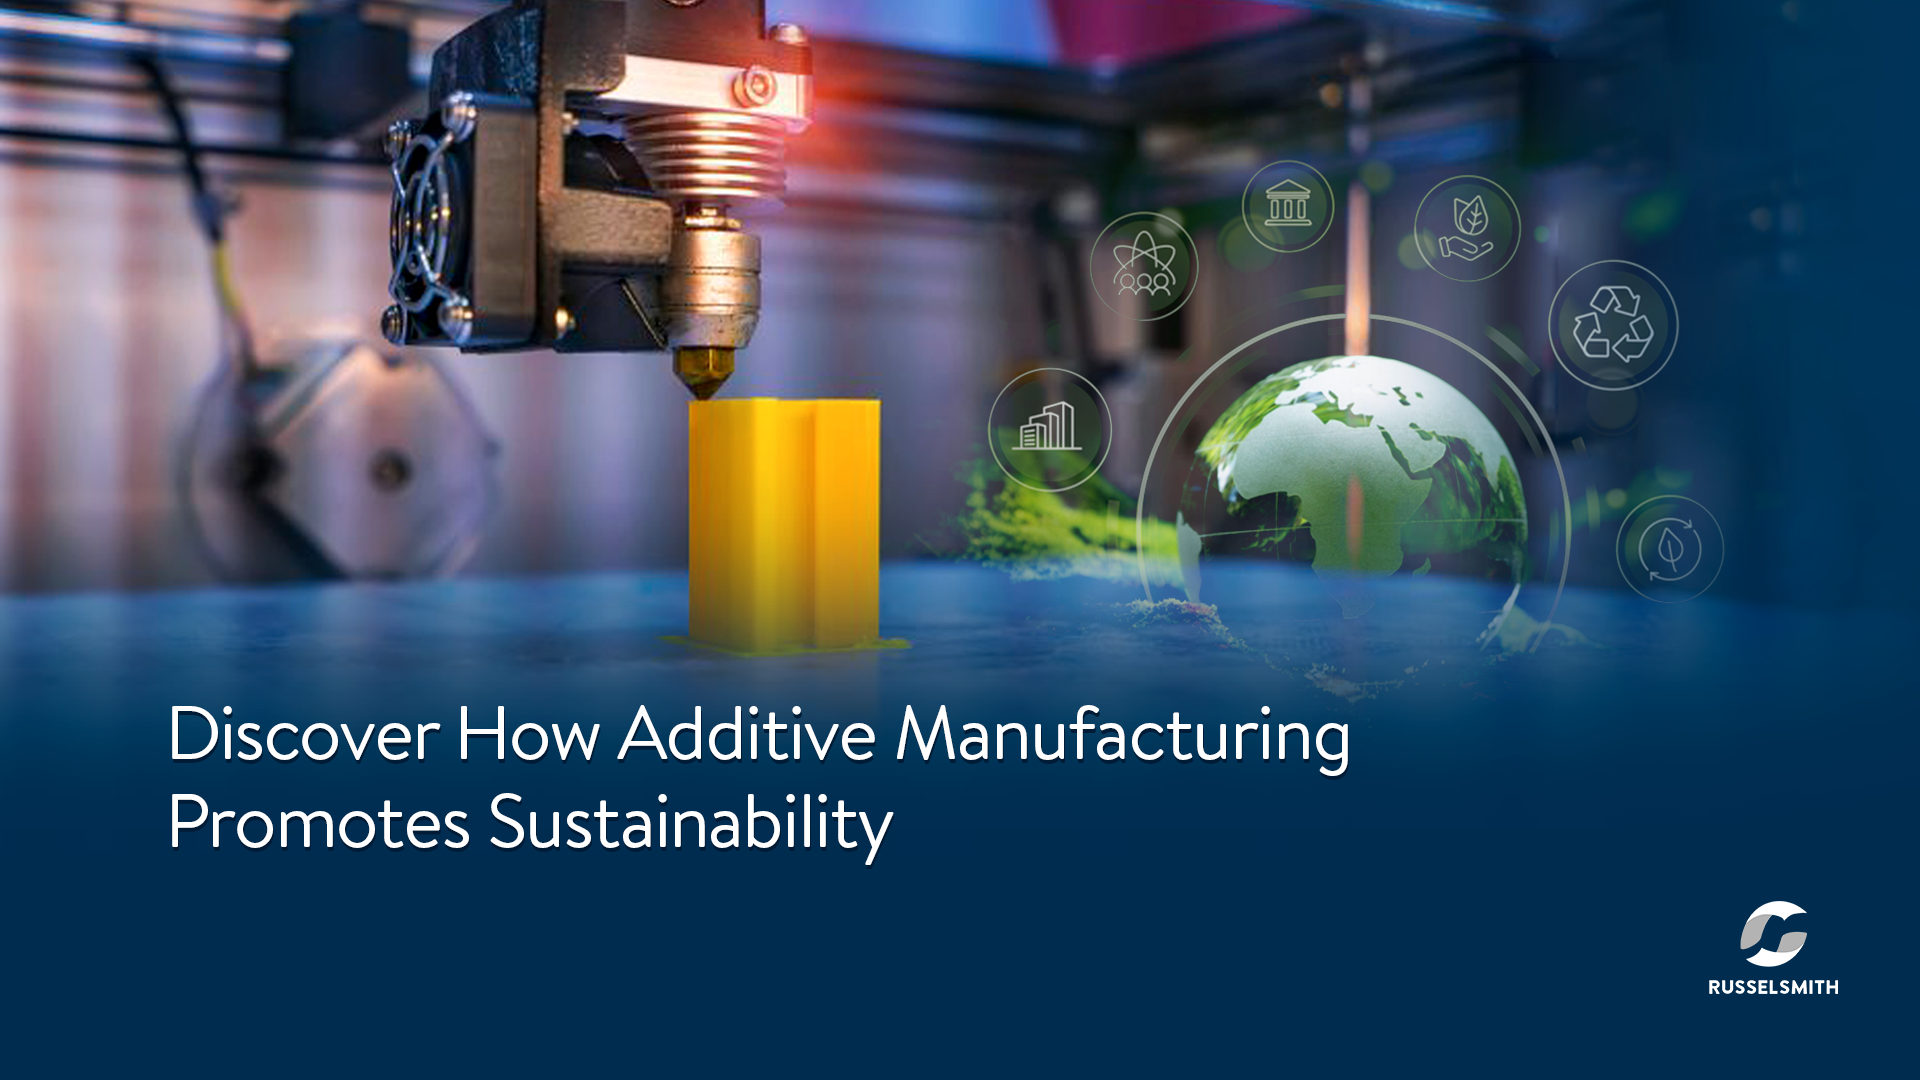 How Additive Manufacturing Is Helping Companies Become More Sustainable